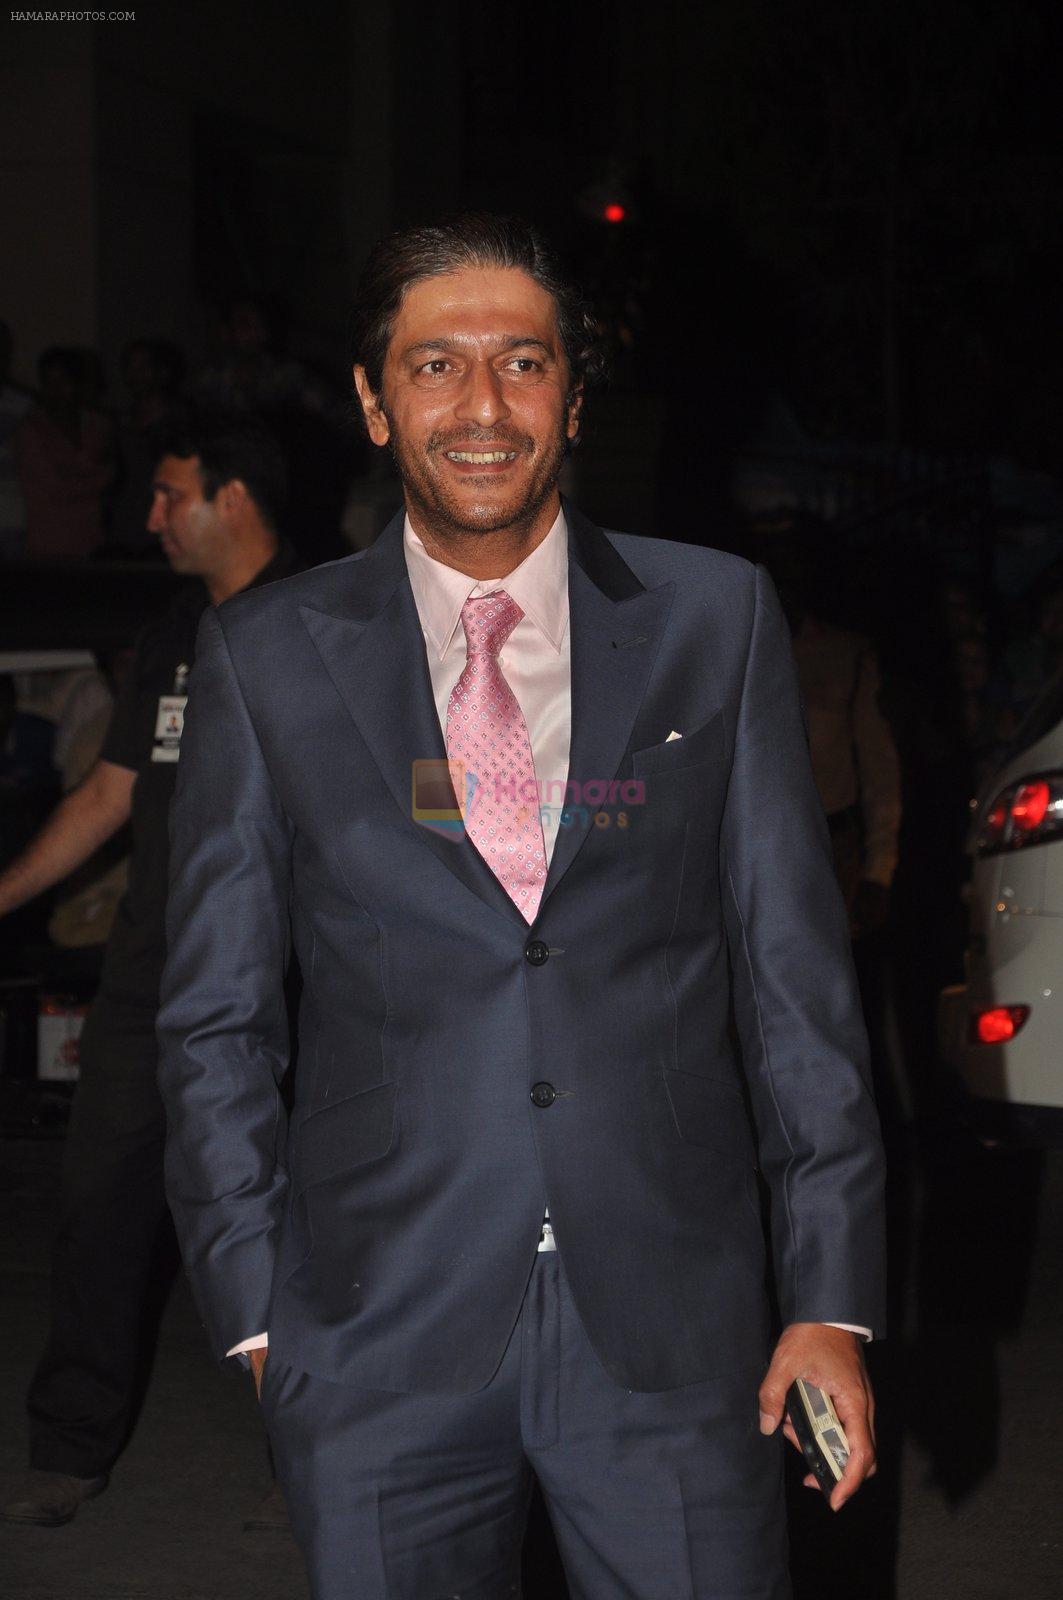 Chunky Pandey at Filmfare Awards 2015 Arrival on 31st Jan 2015